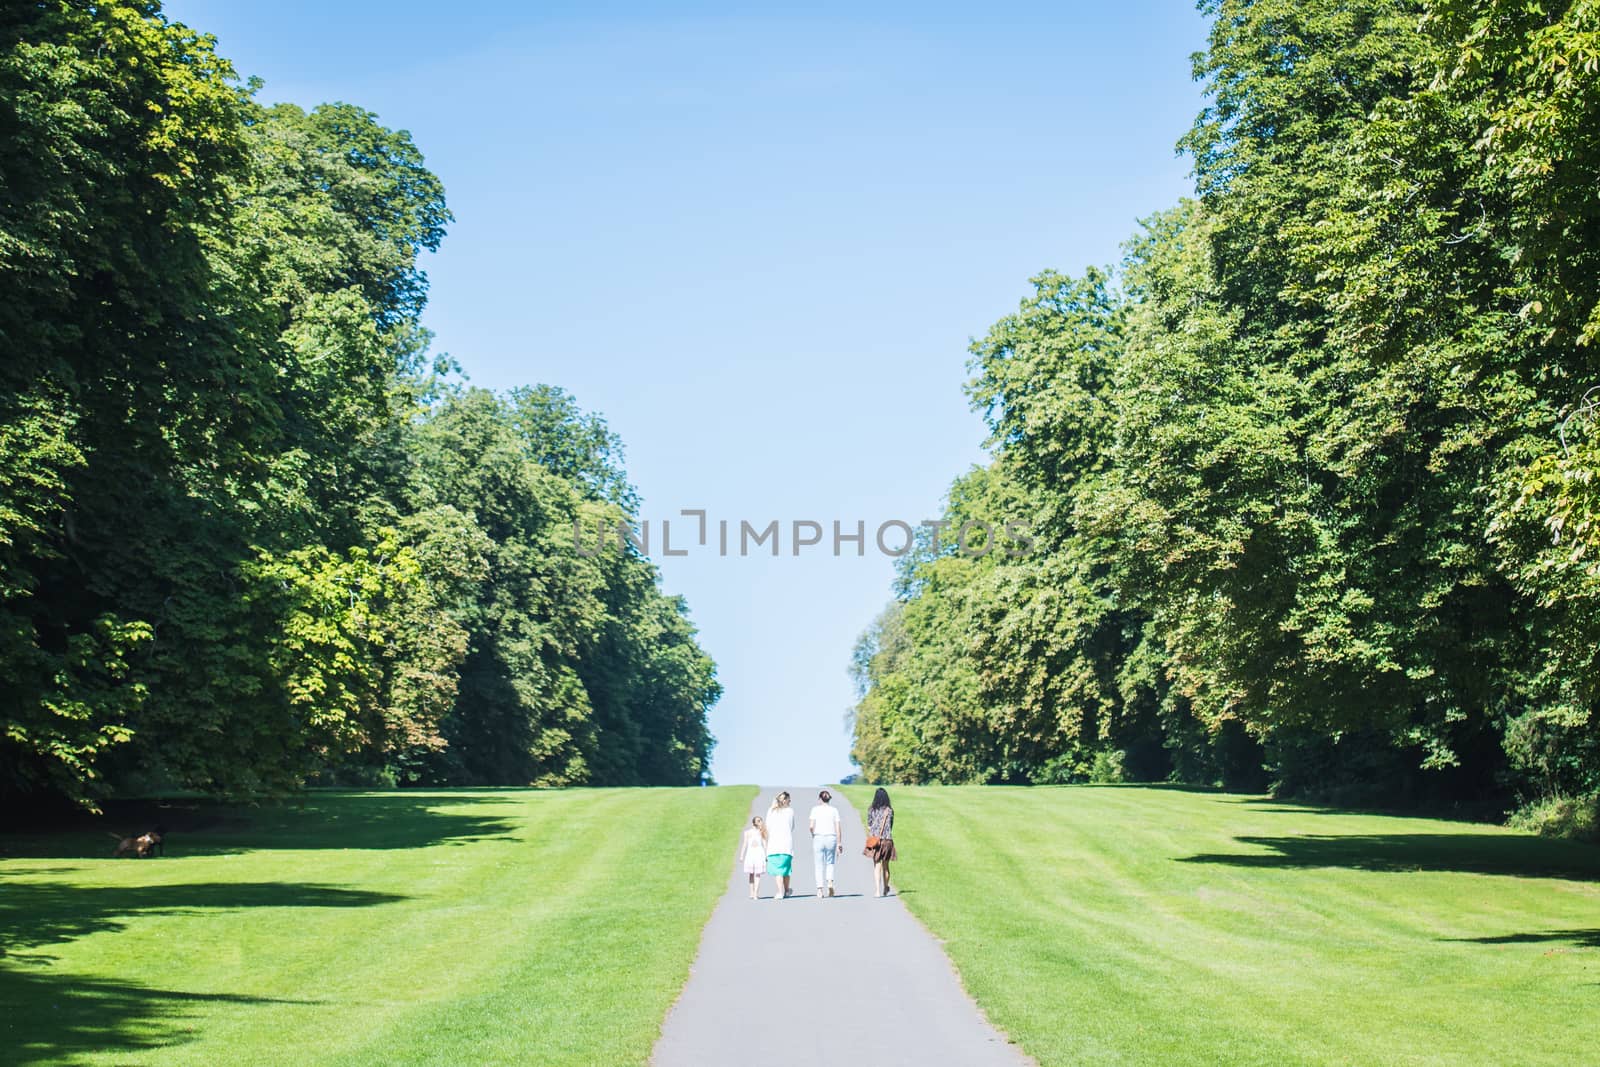 Family Walk together at Cirencester park in summertime